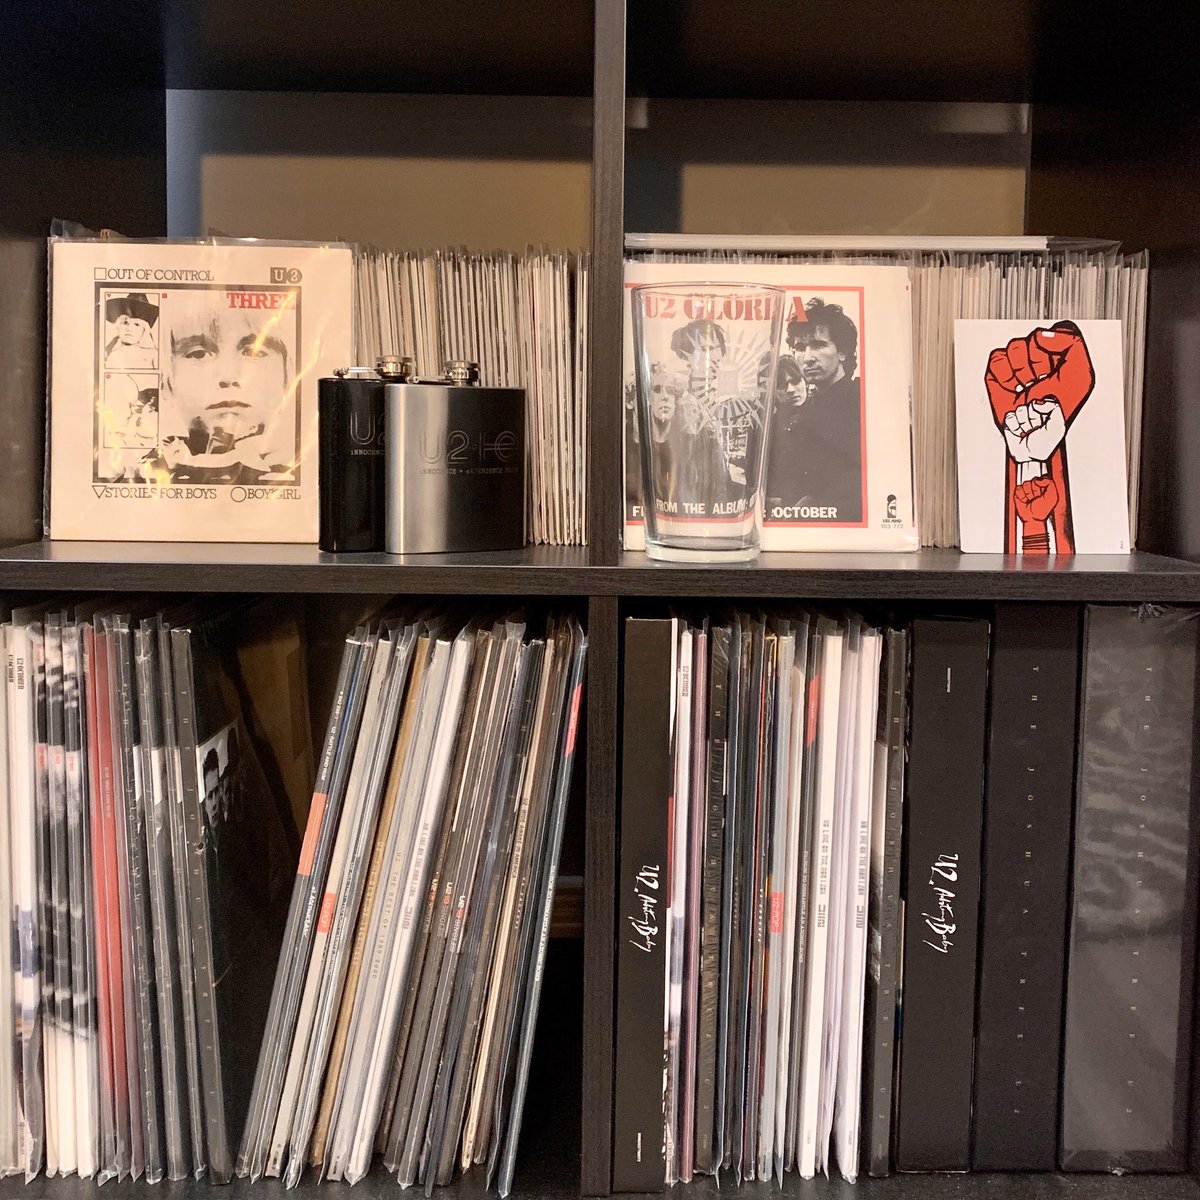 Photo 2: 7-inch singles across the top along with another SOI glass and one of the post cards from the SOE tour. New vinyl (albums) on the bottom (>2008) and boxed sets. Sitting on top of the 7-inches is some writing paper from the SOE promo campaign.